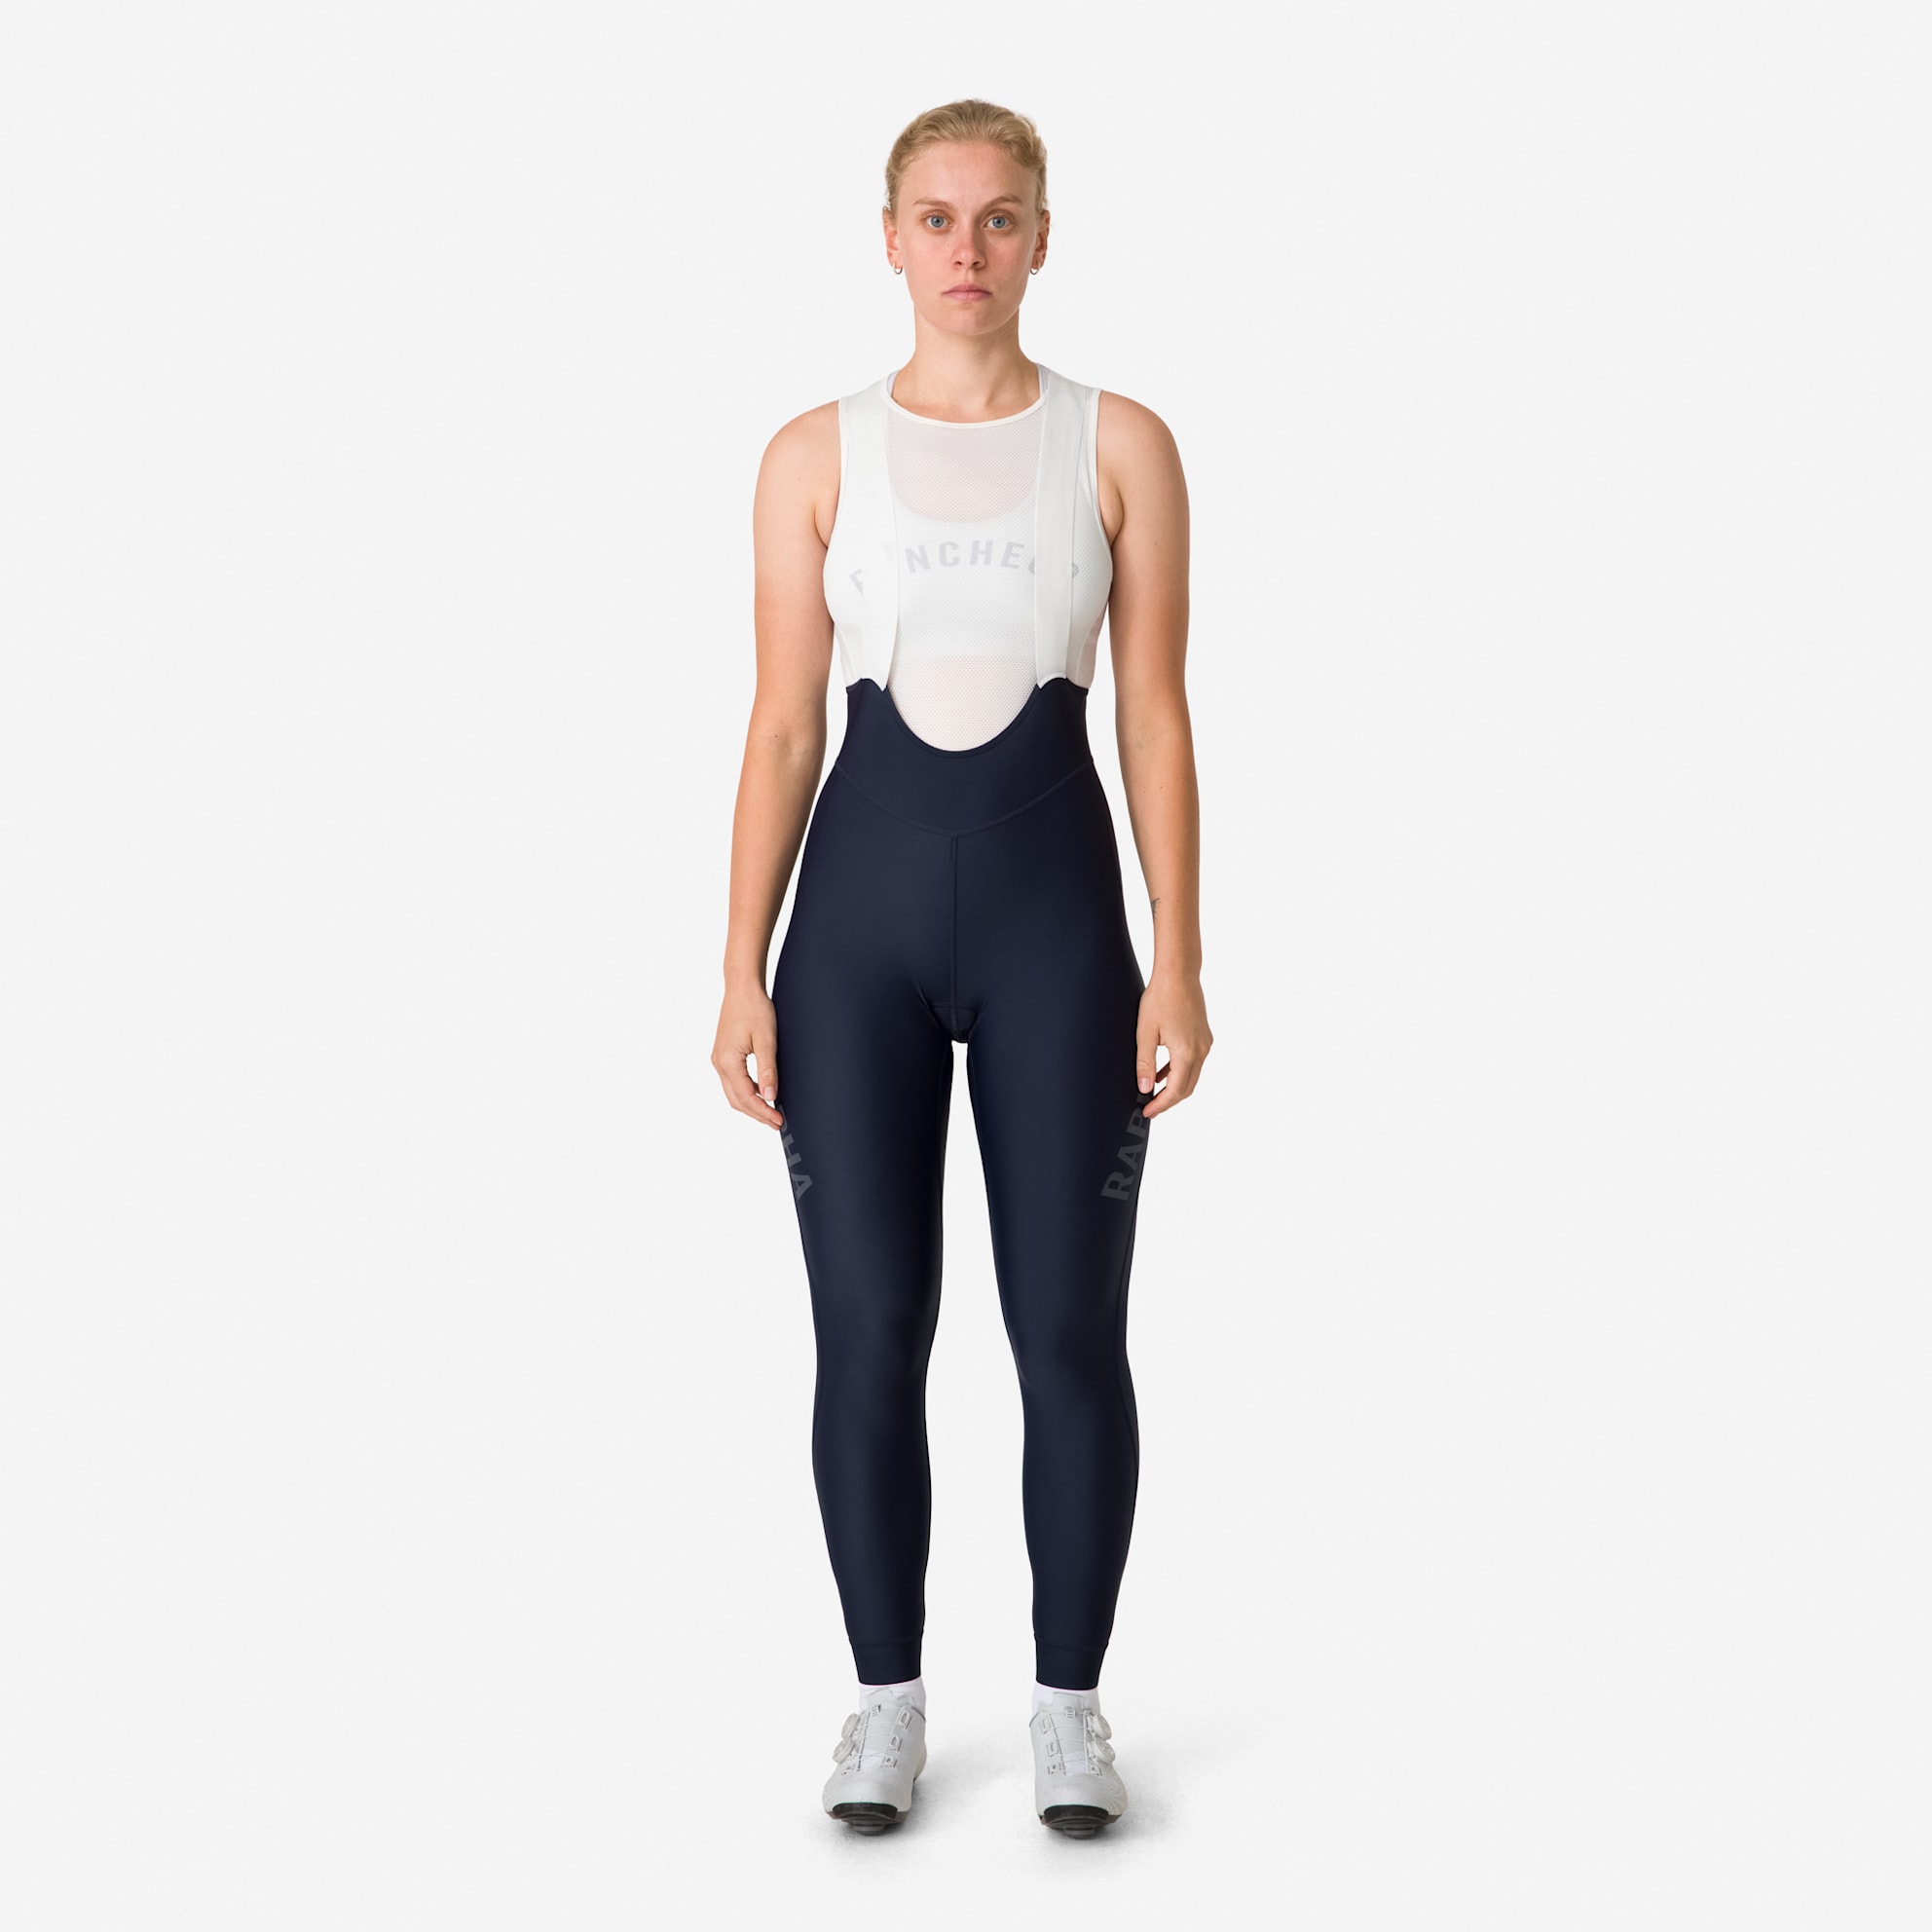 Women's Pro Team Lightweight Tights with Pad